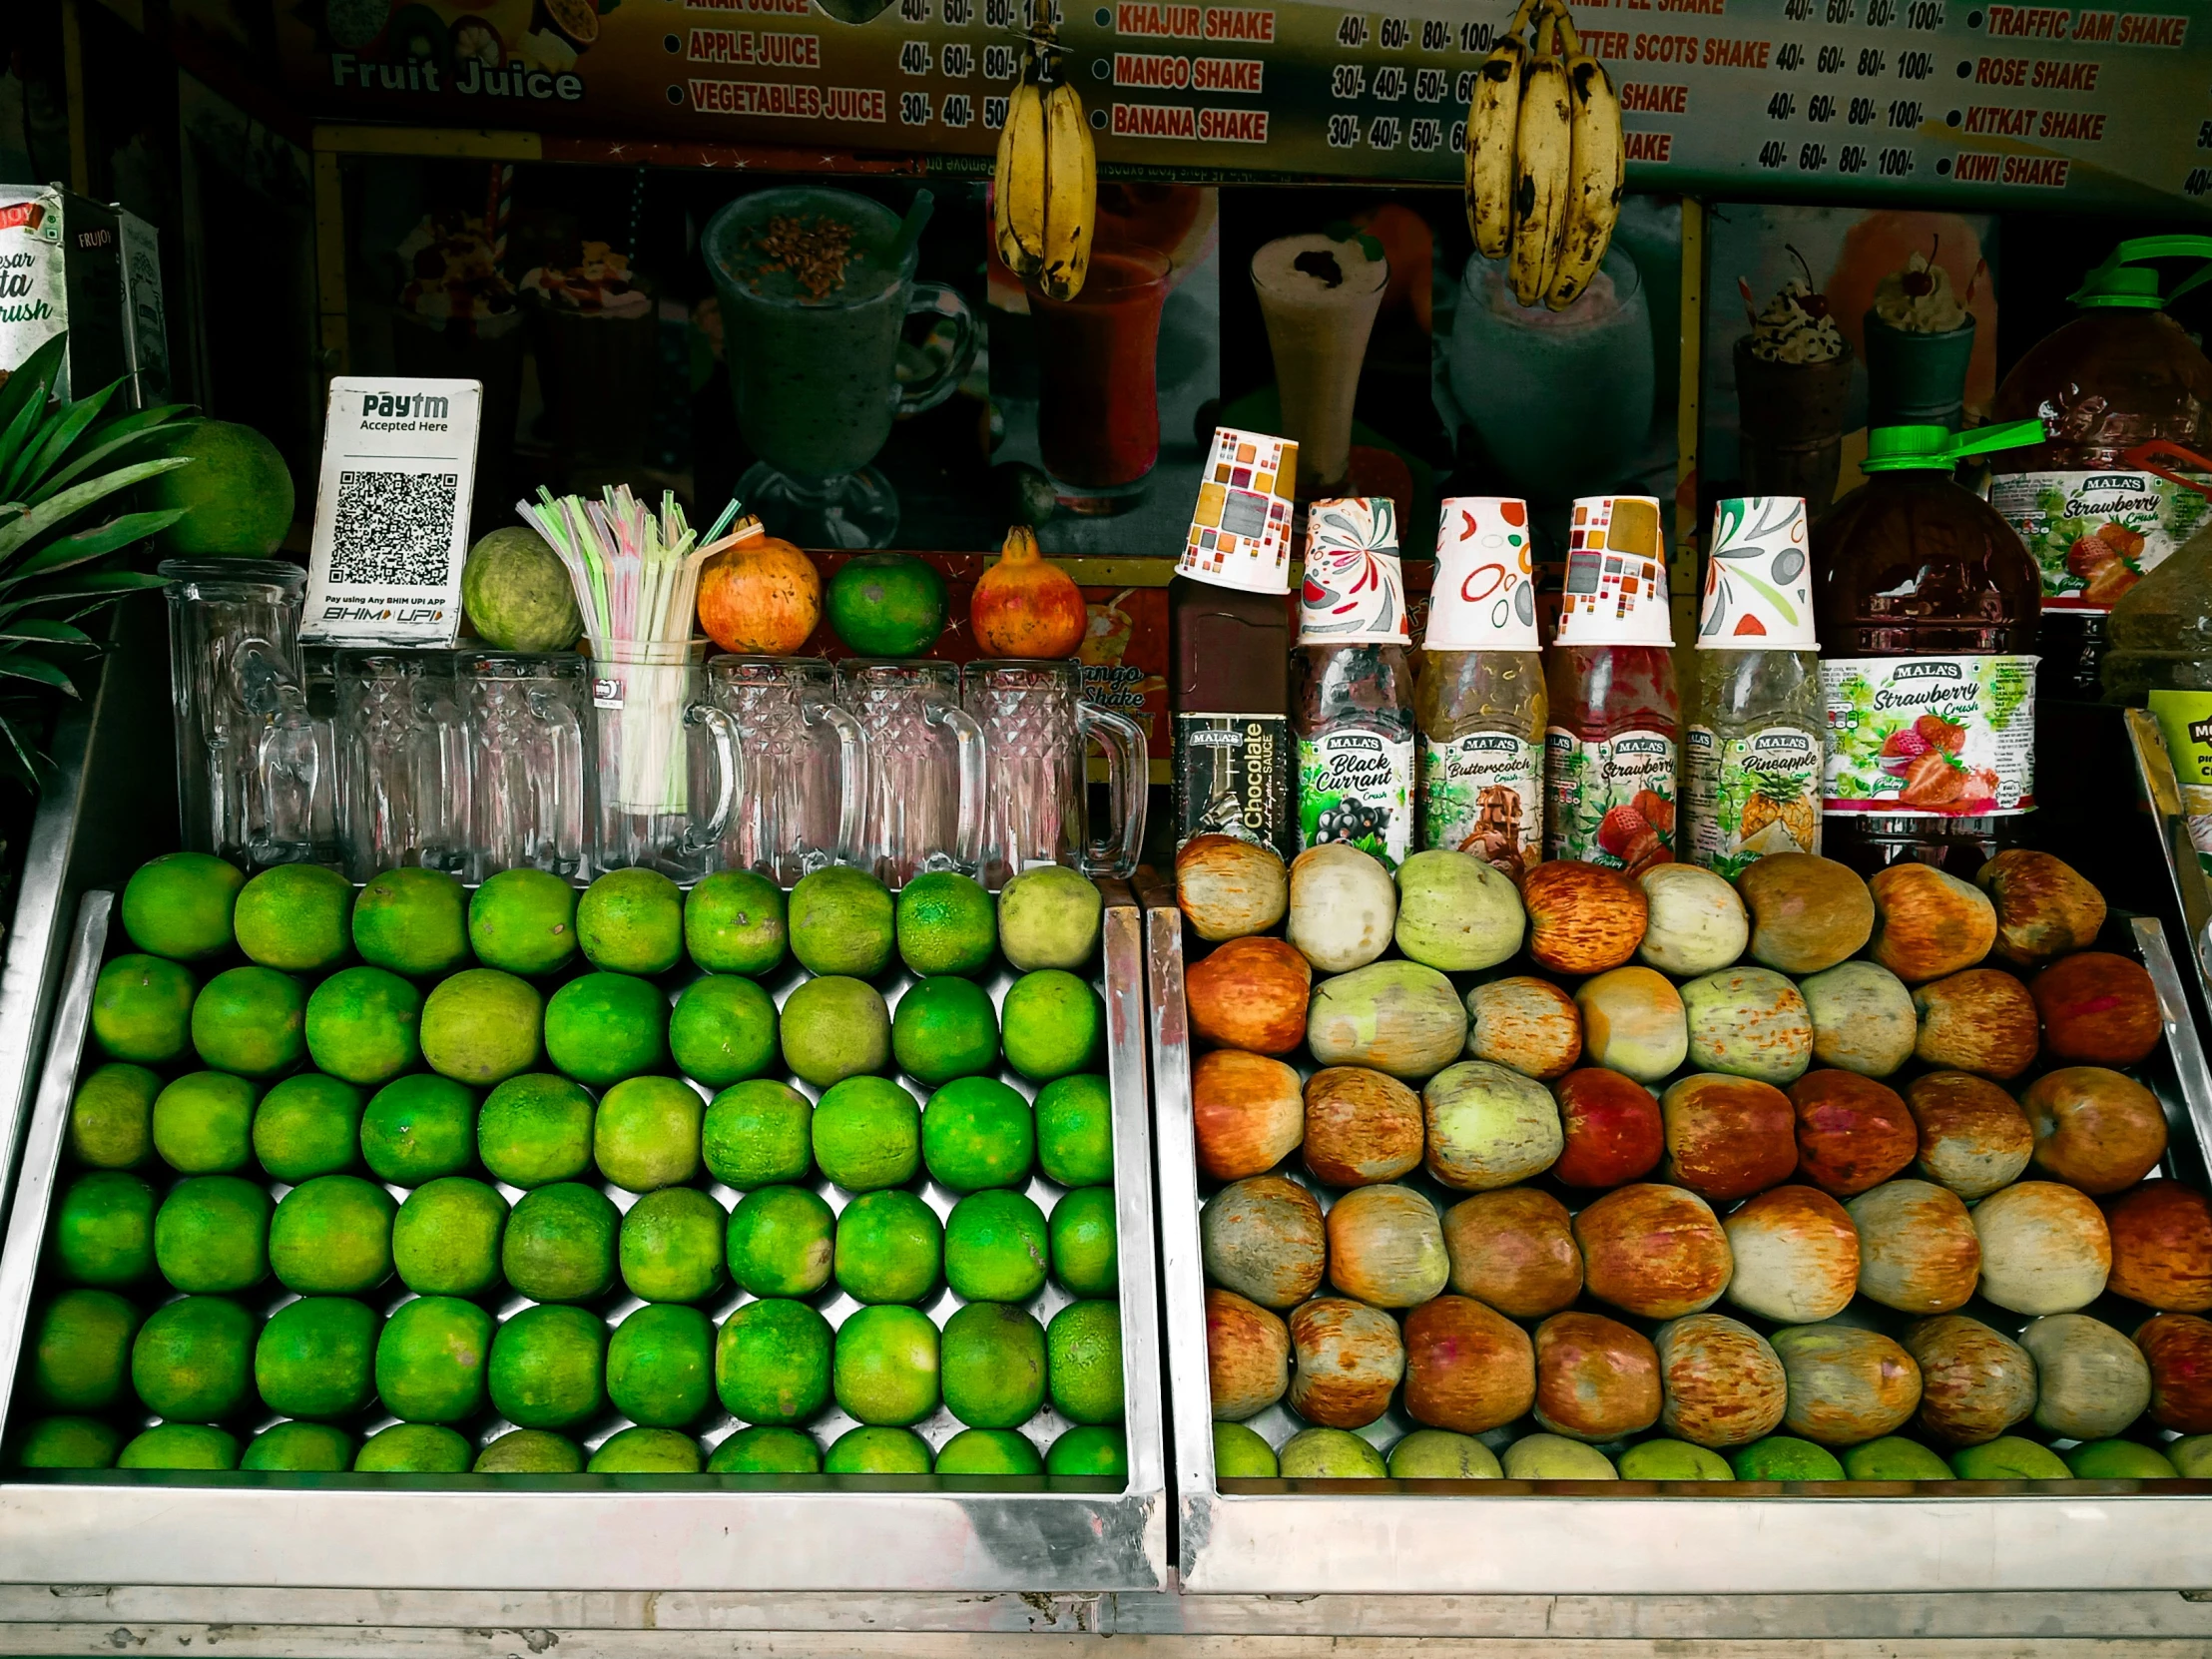 the fruits are sitting at the stand for sale